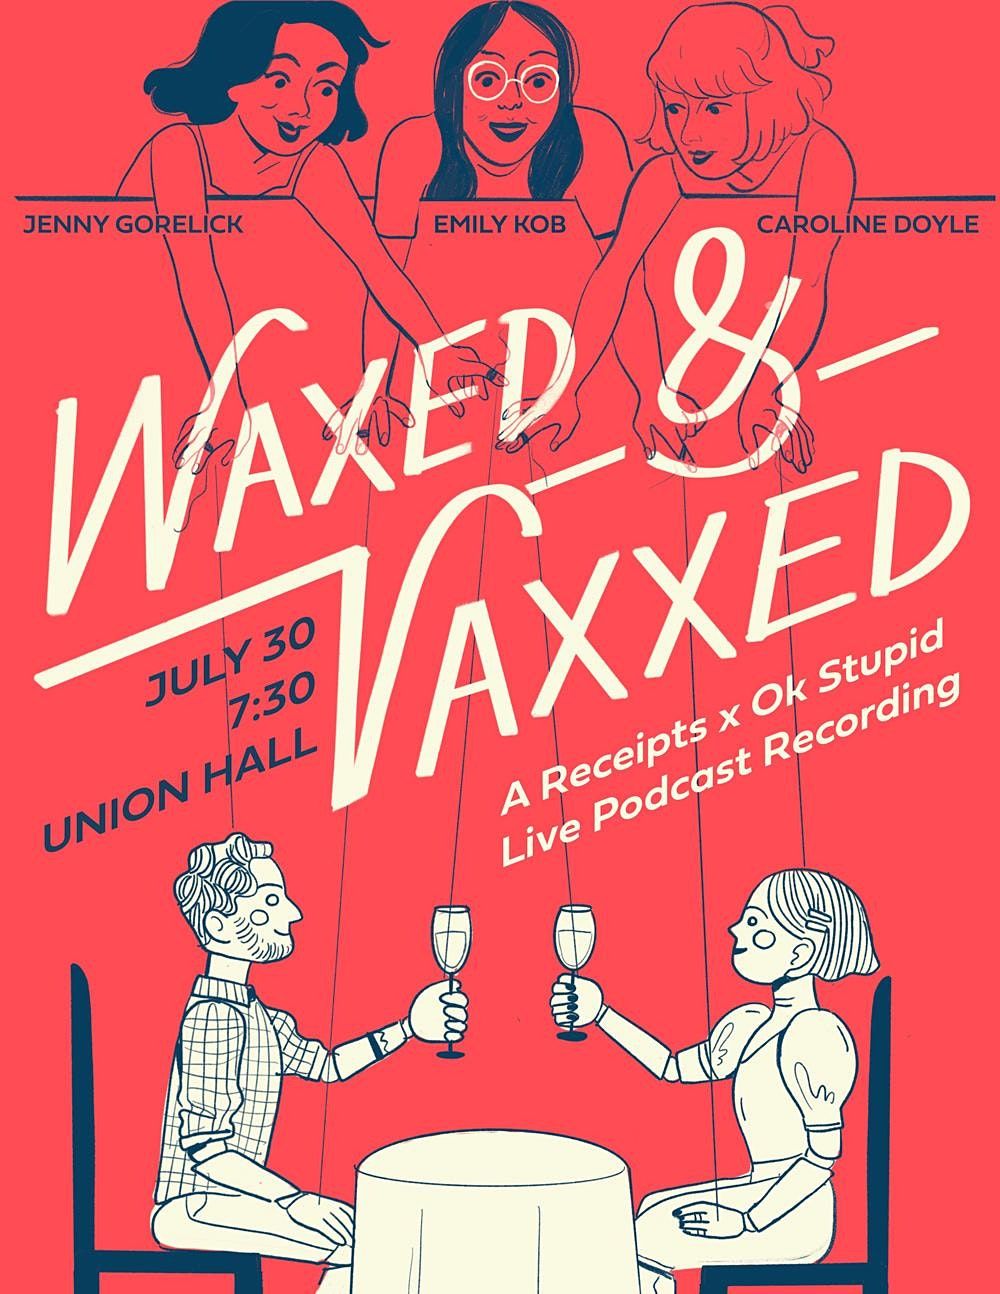 Waxed and Vaxxed:  A Receipts x Ok, Stupid Live Podcast Recording